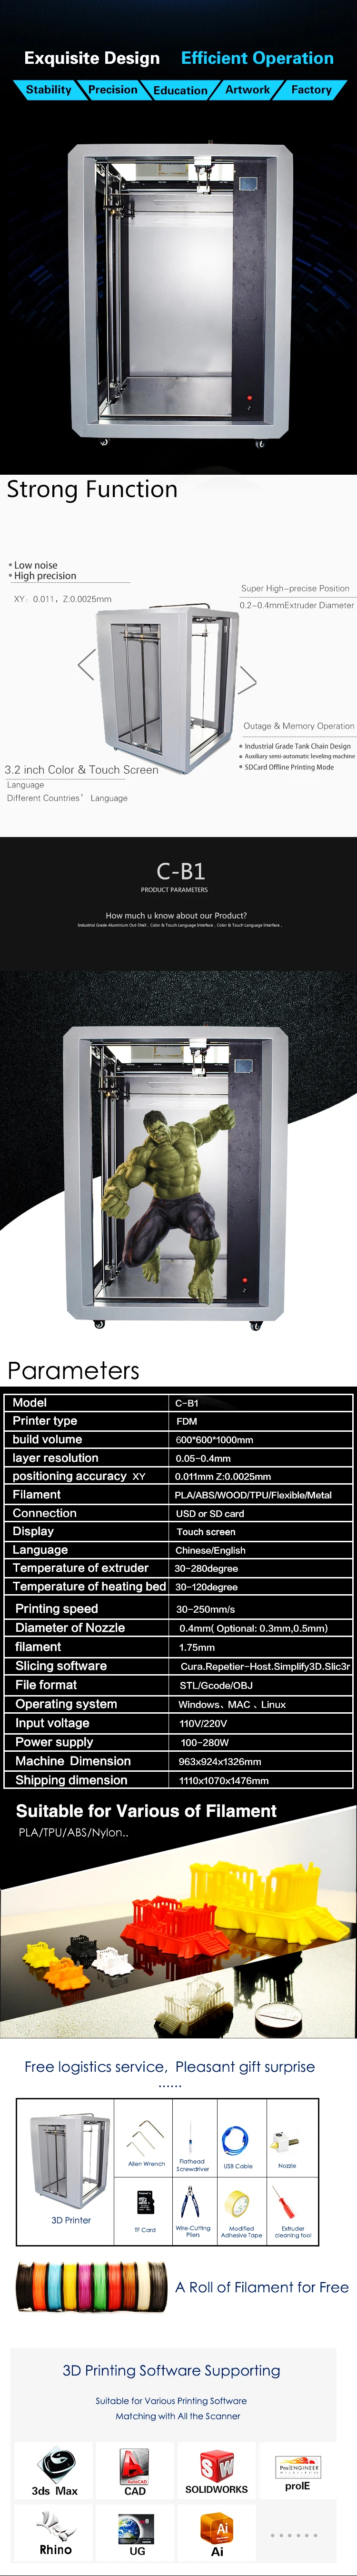 600x600x1000mm high precision large 3D printer and digital 3D printer with filament detection